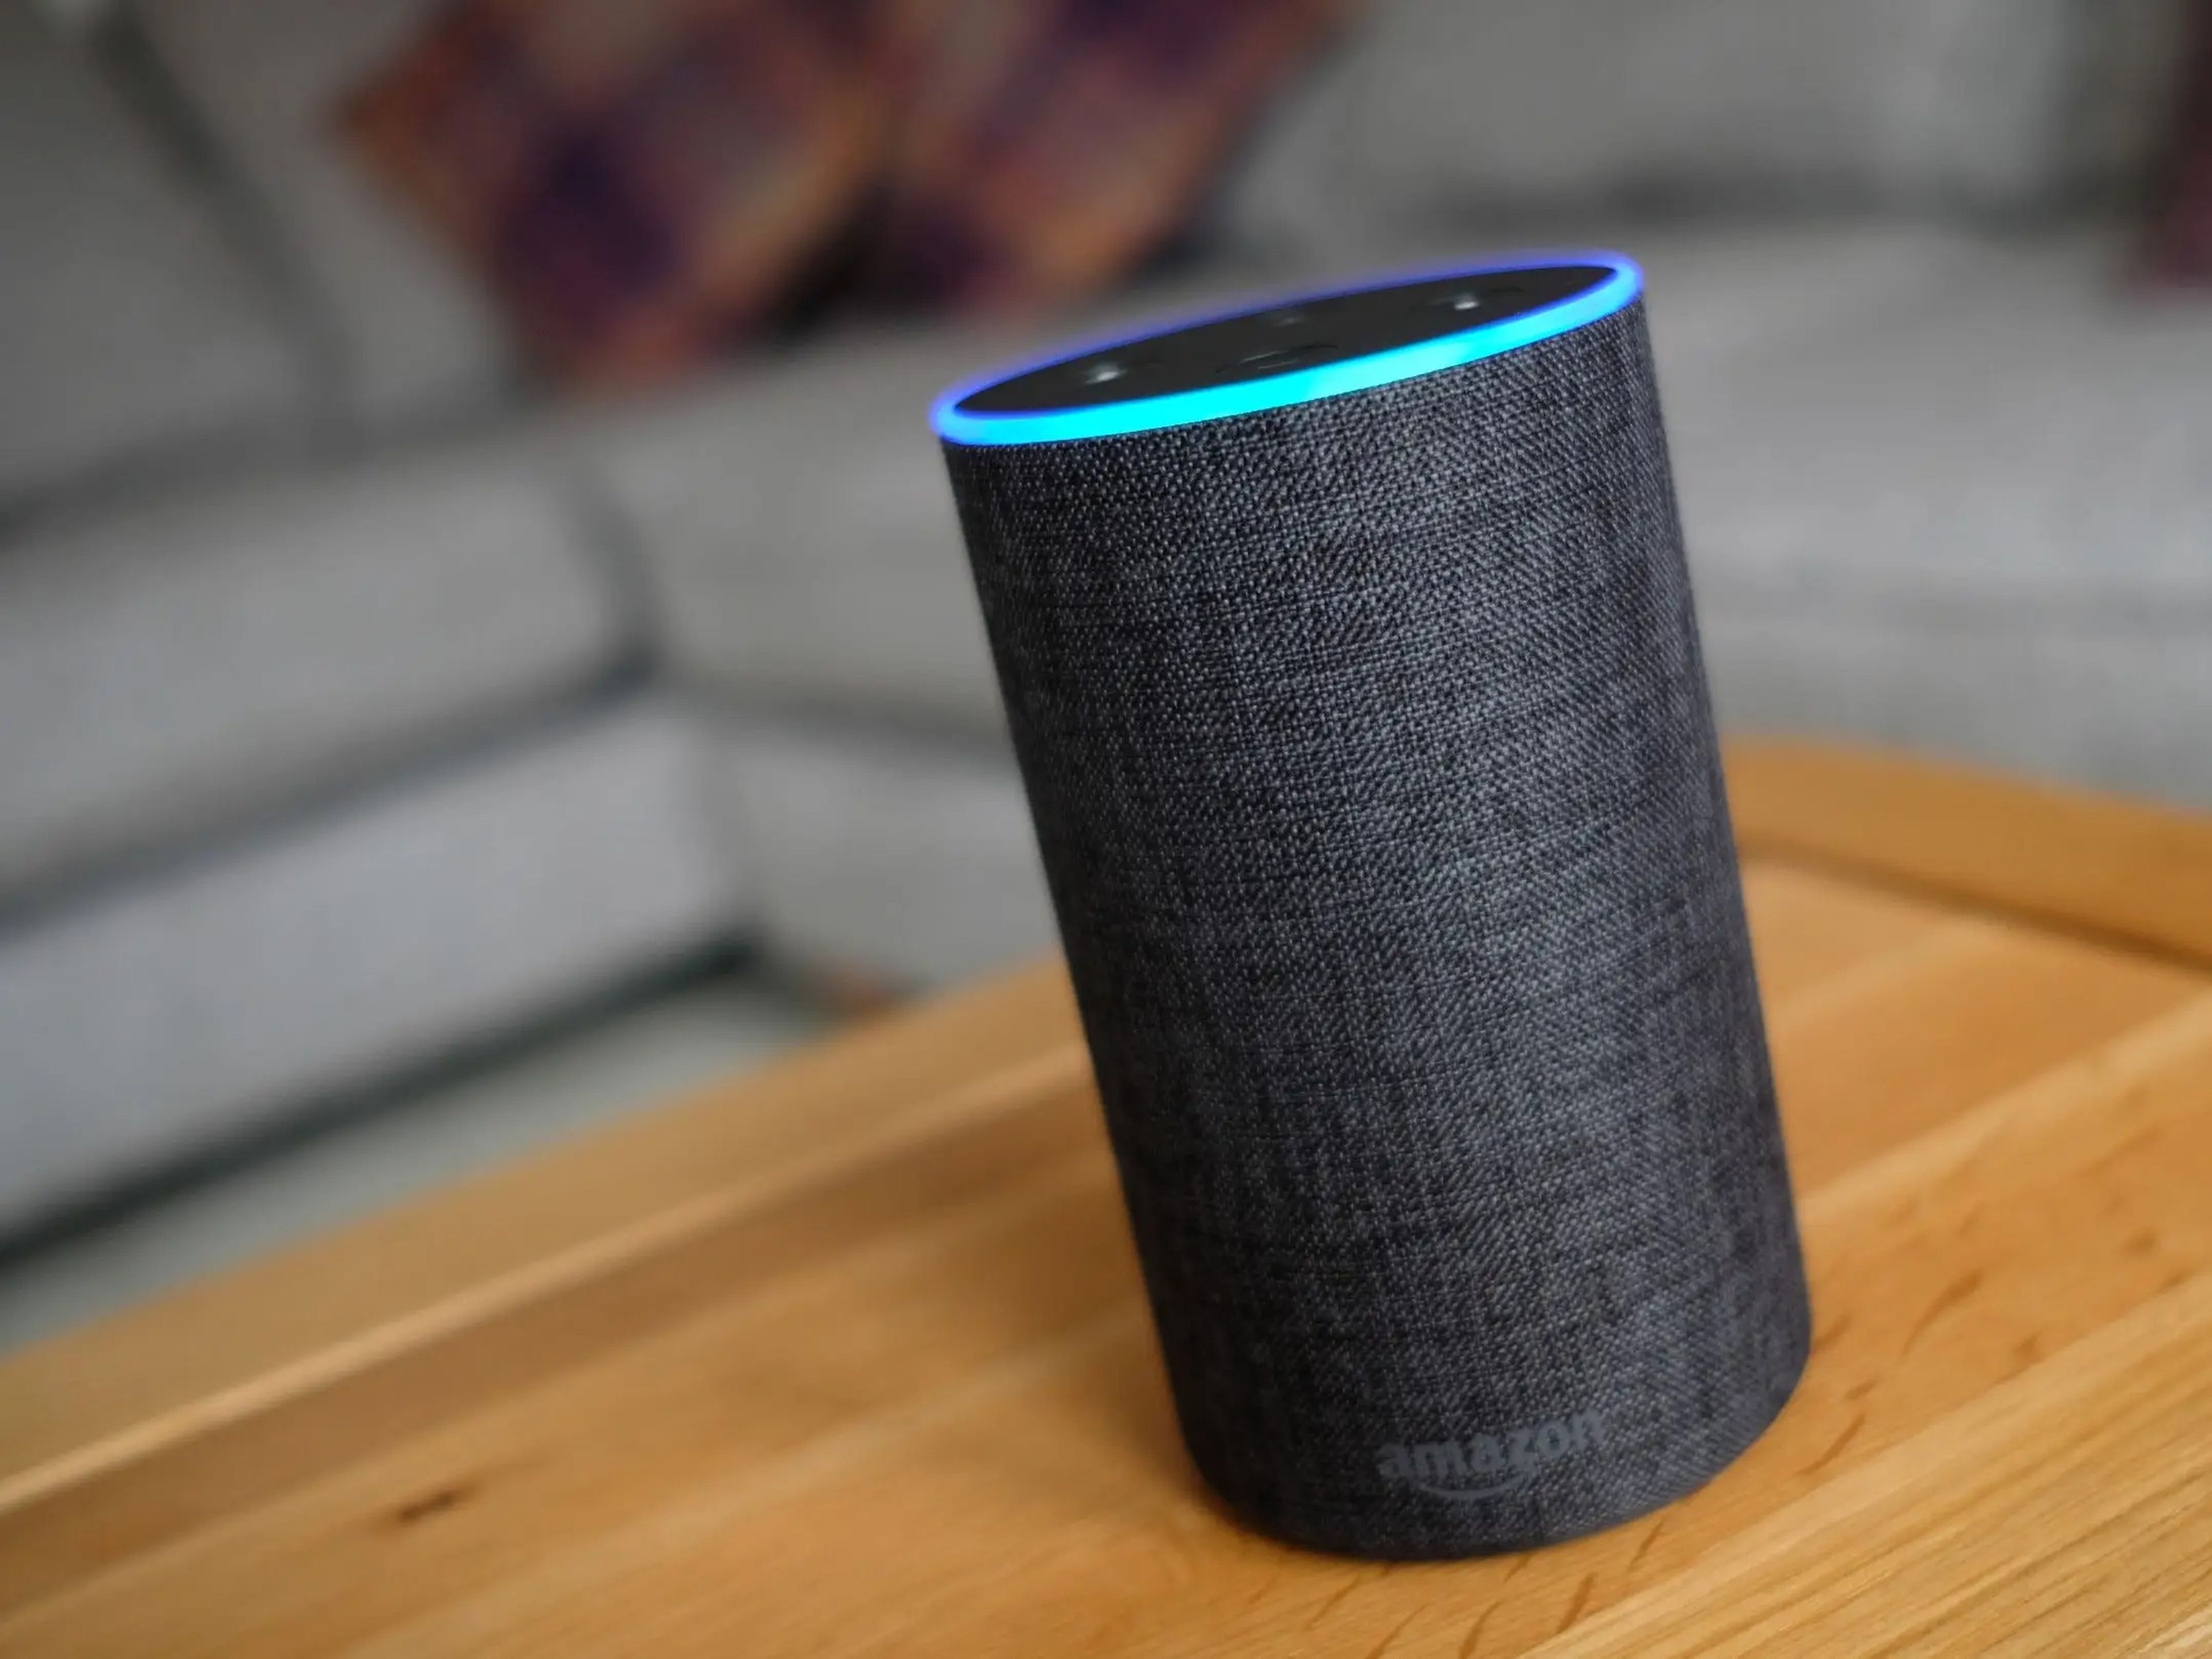 Amazon's Alexa is set to answer people's queries, from the weather to CDC guidelines.